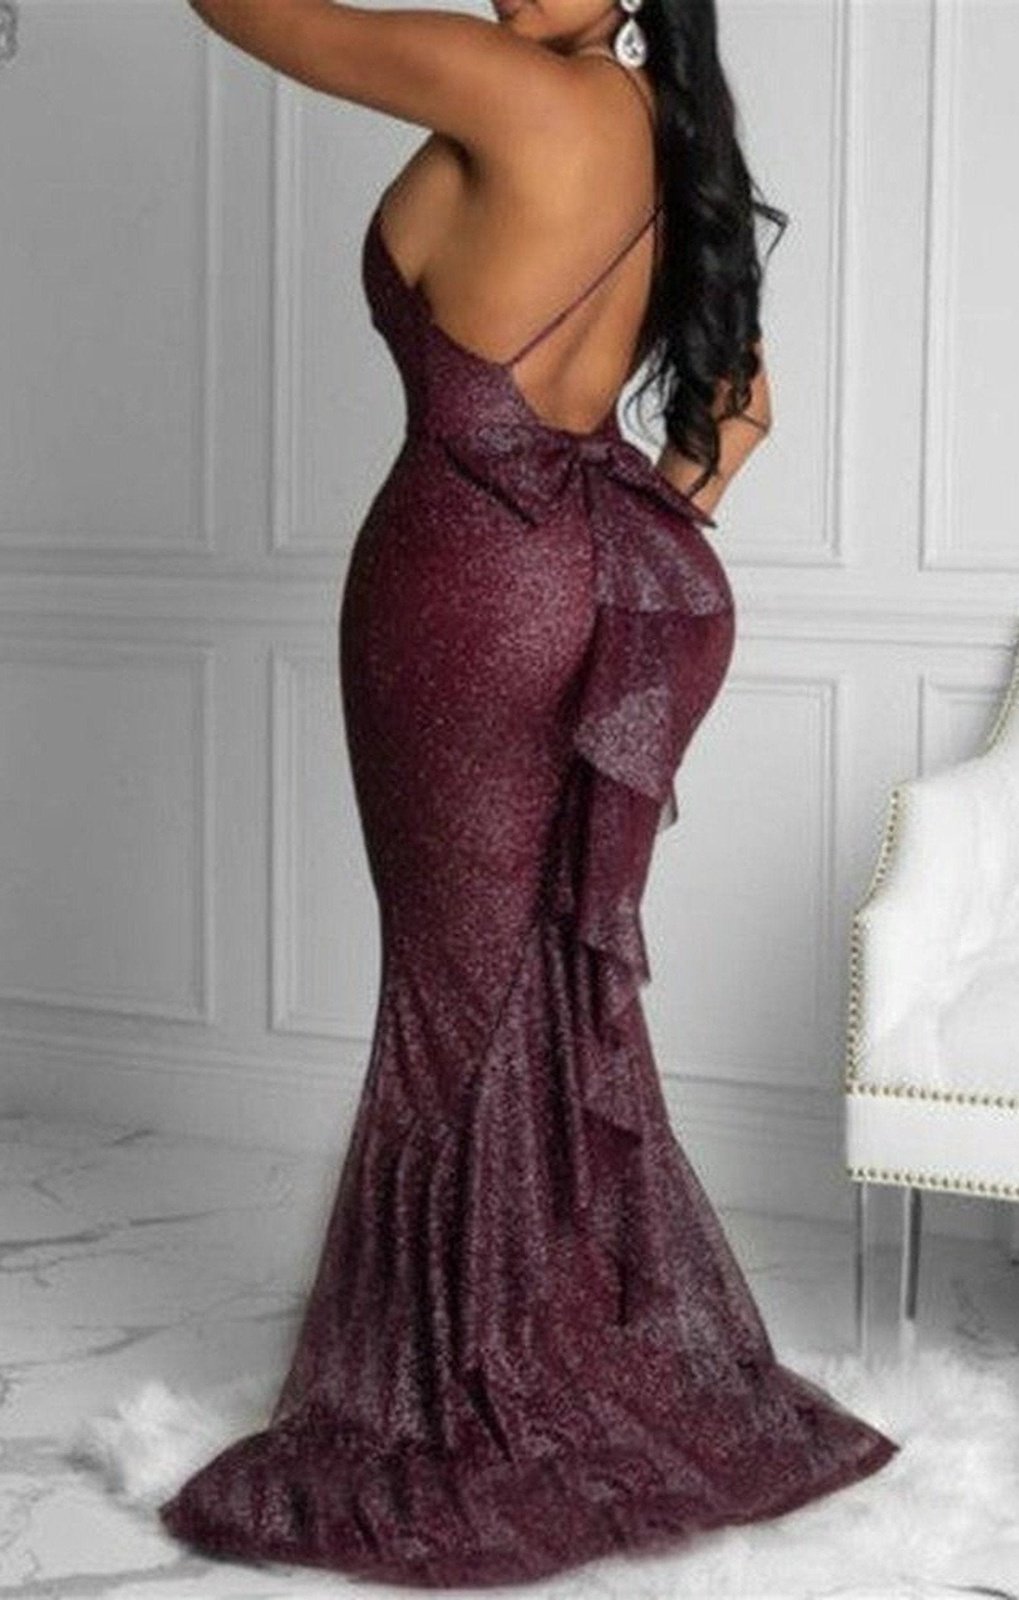 Open back fishtail elegant sexy fashion maxi gown (3 COLORS)